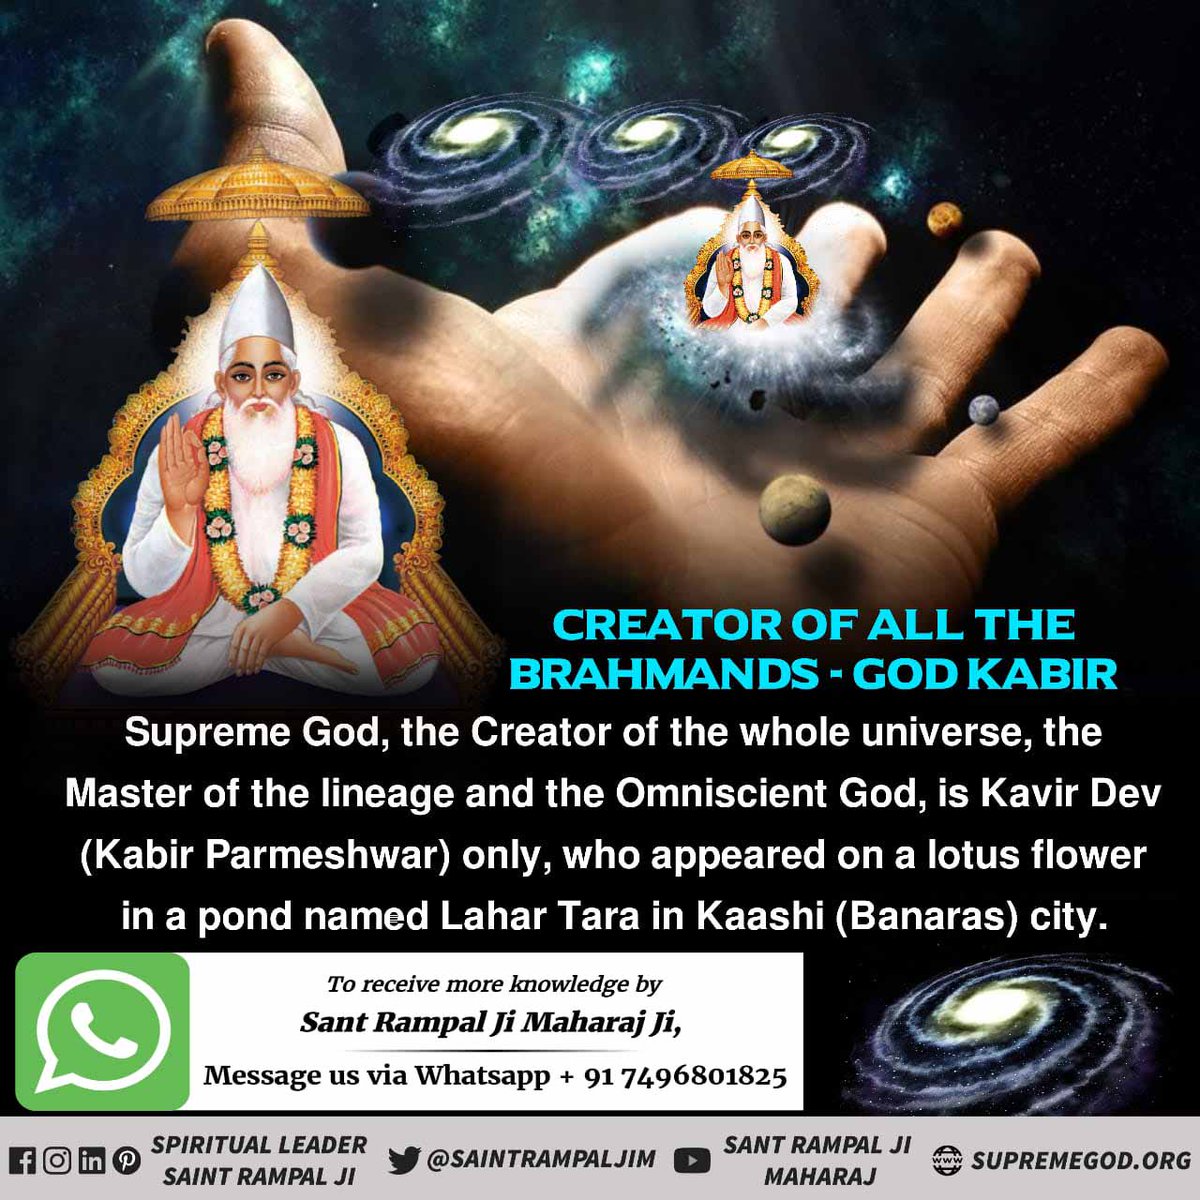 #GodMorningMonday
Creator of all the Brahmands -God Kabir .
Supreme God, the creator of the whole universe, the master of the lineage and the omniscient God, is Kavir Dev (Kabir Parmeshwar) only, who appeared on a lotus flower in a pond name Lahar Tara in Kashi (Banaras) city.